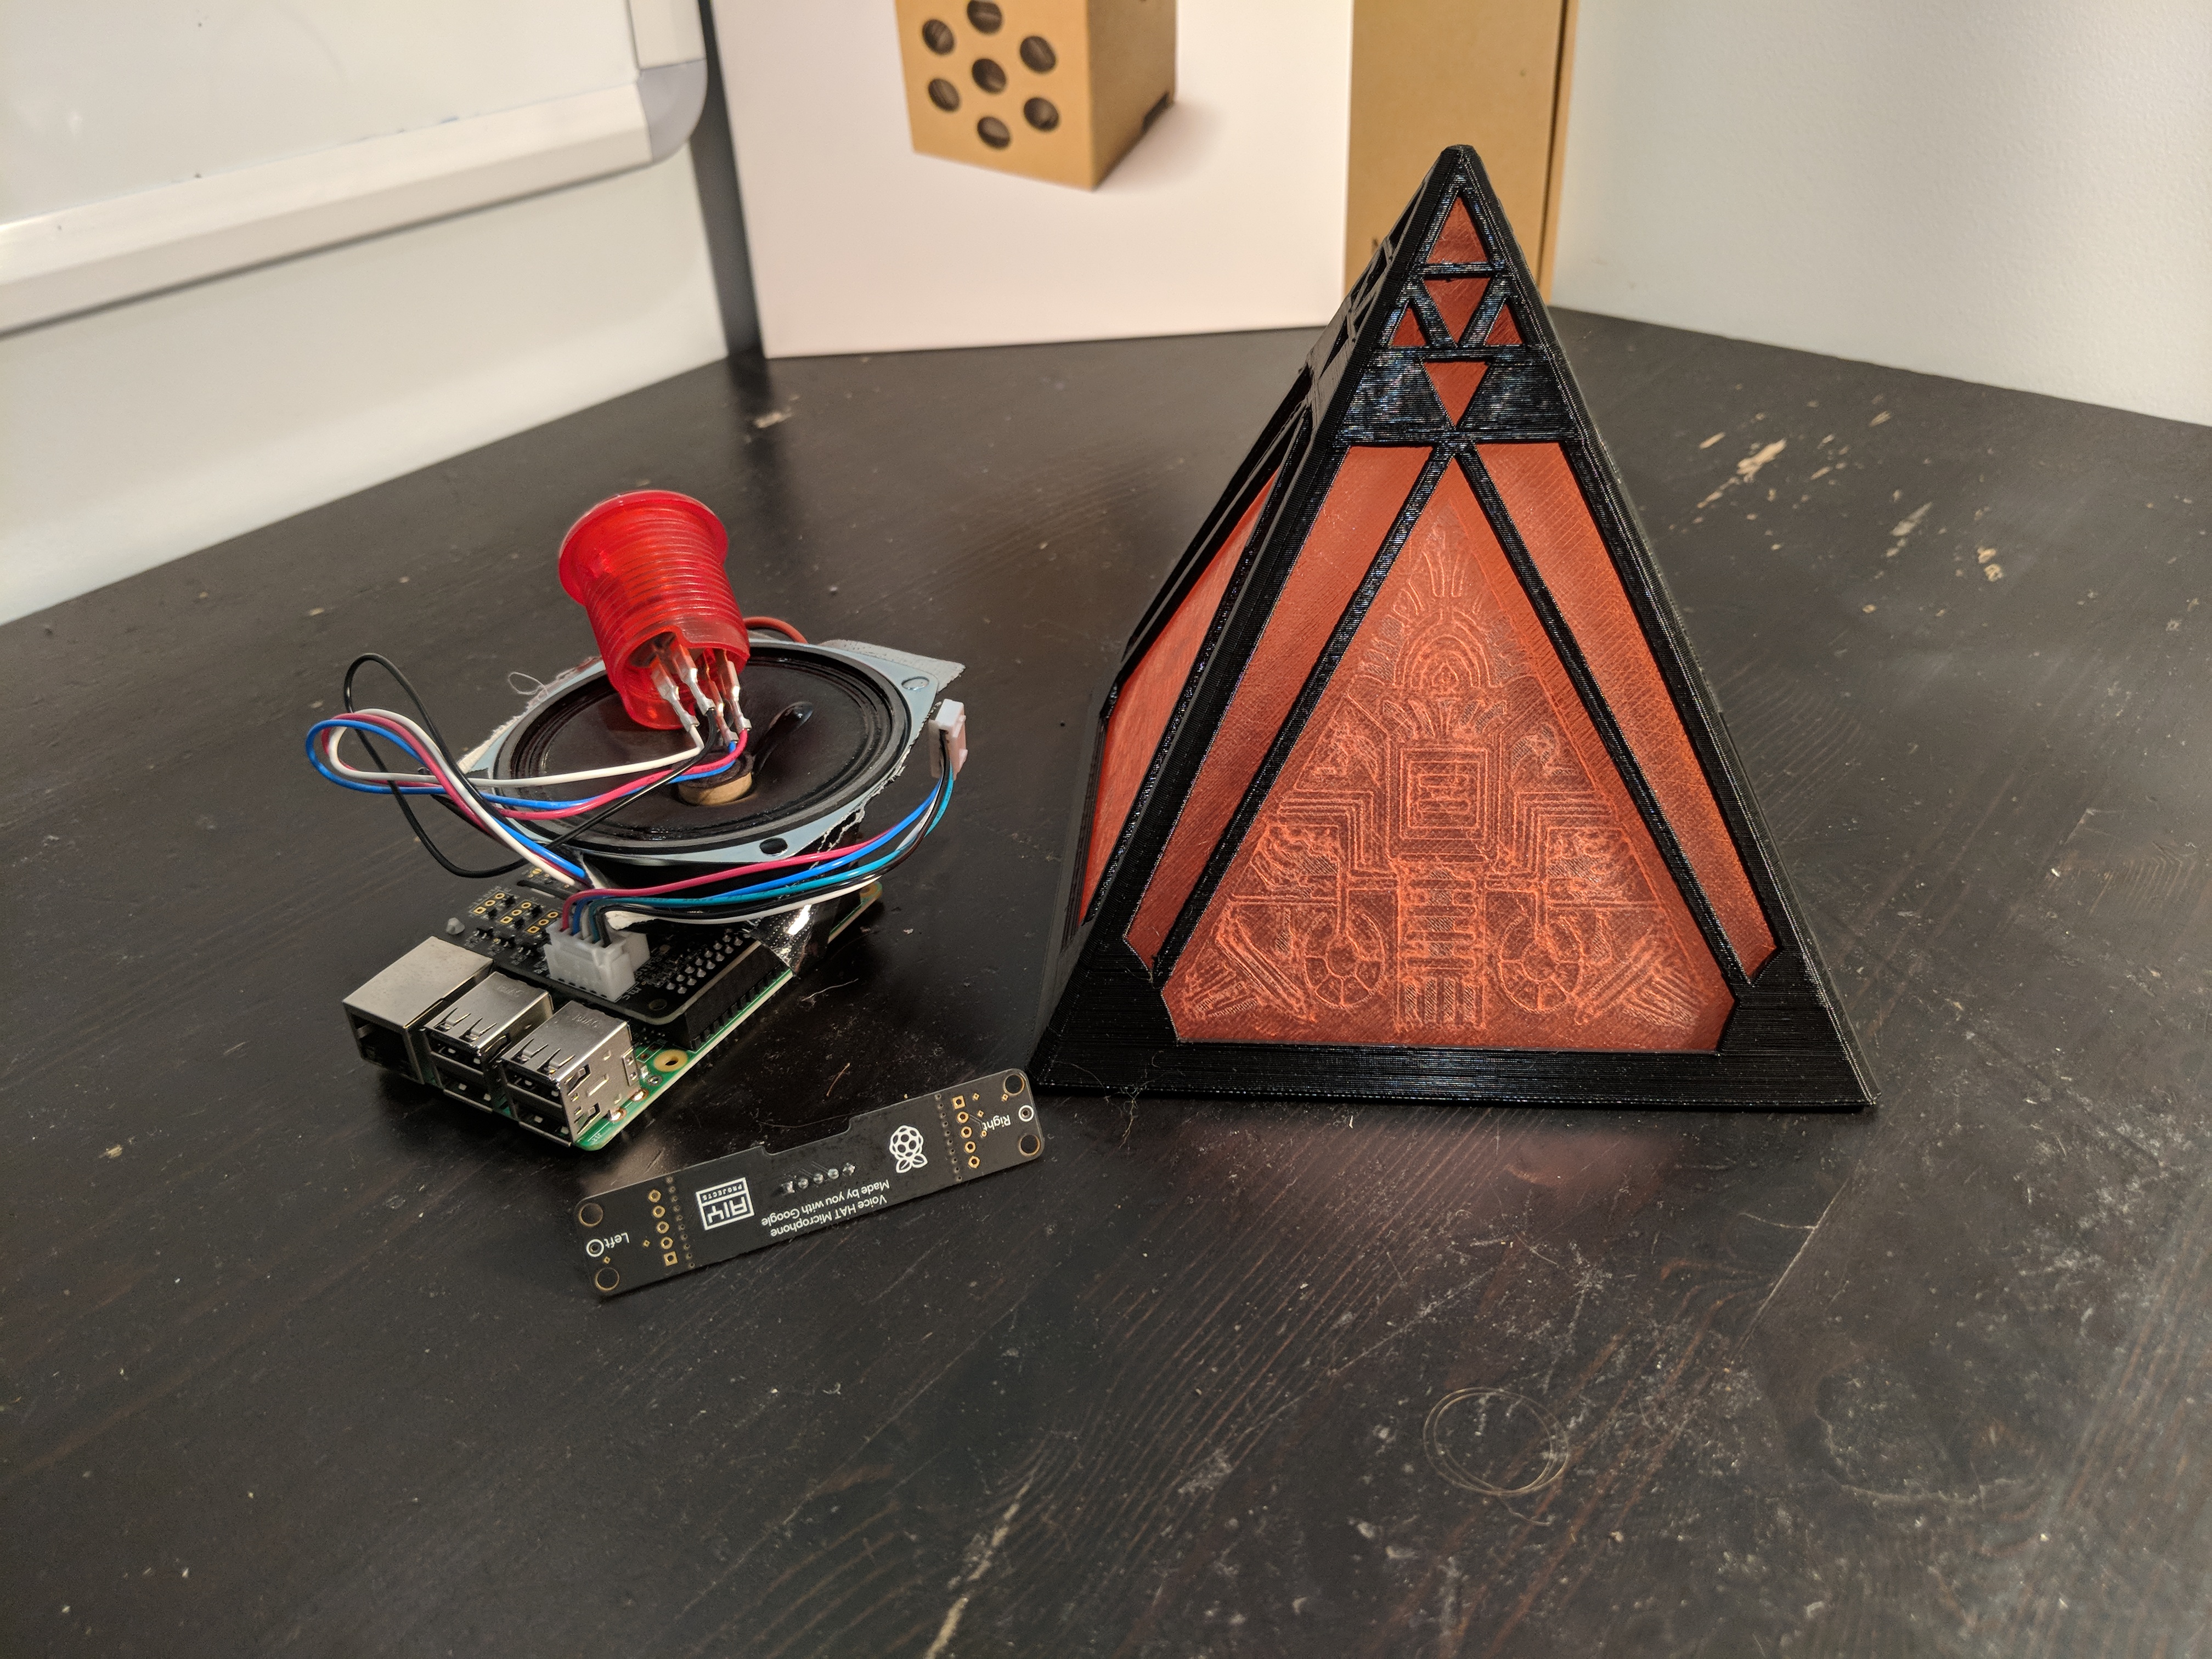 aiy-voice-kit-and-holocron